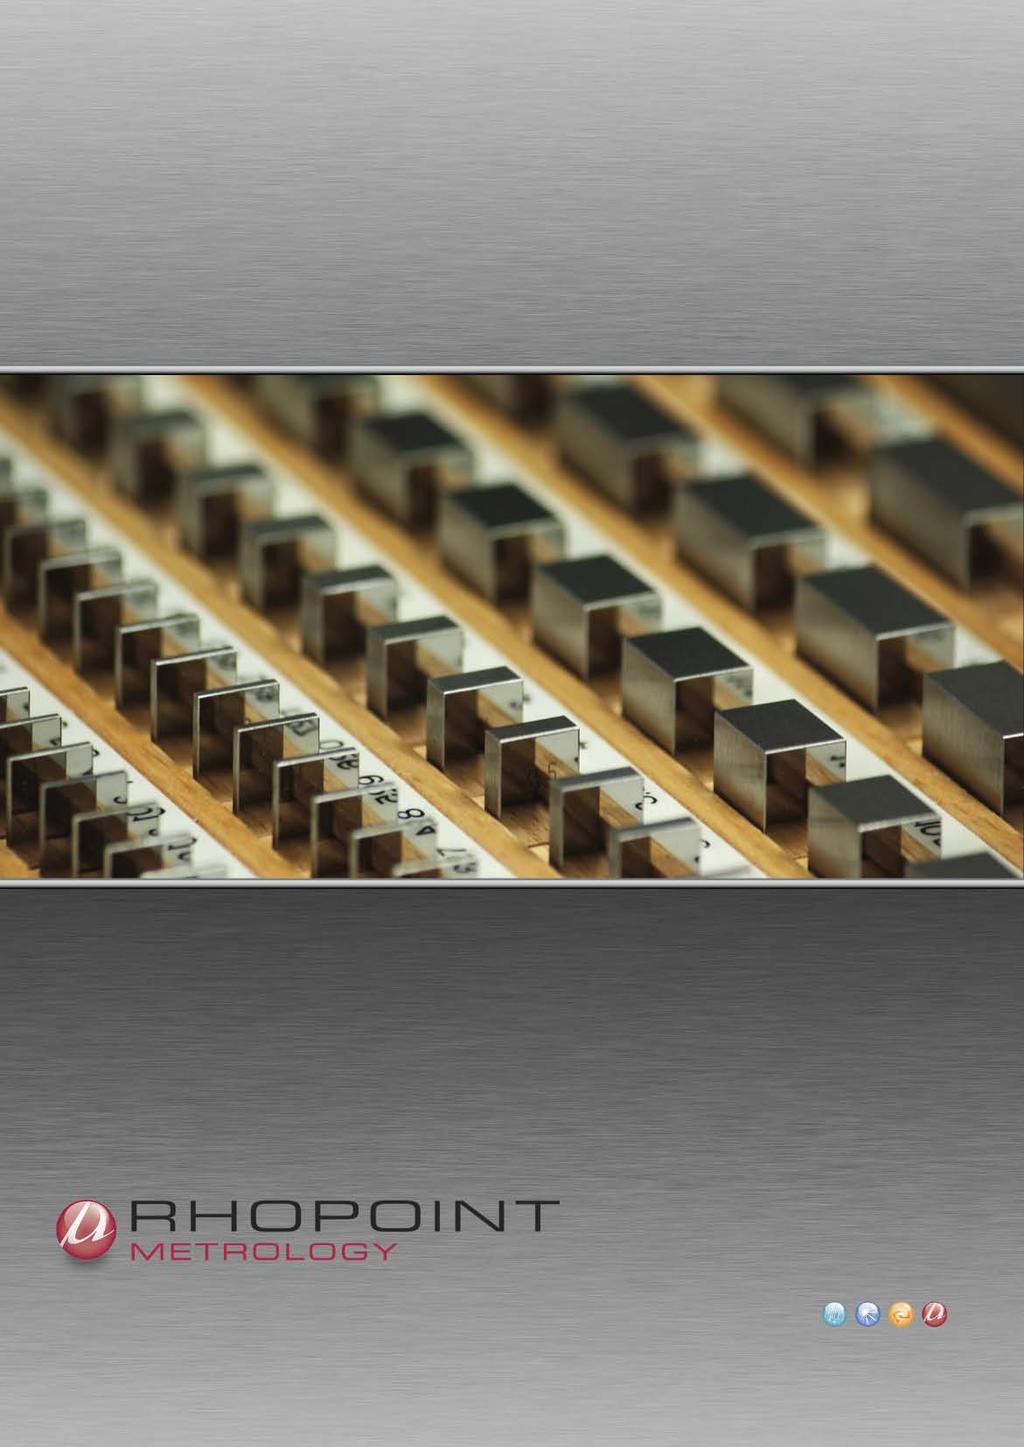 Rhopoint Metrology recognises that our customers peace of mind is of paramount